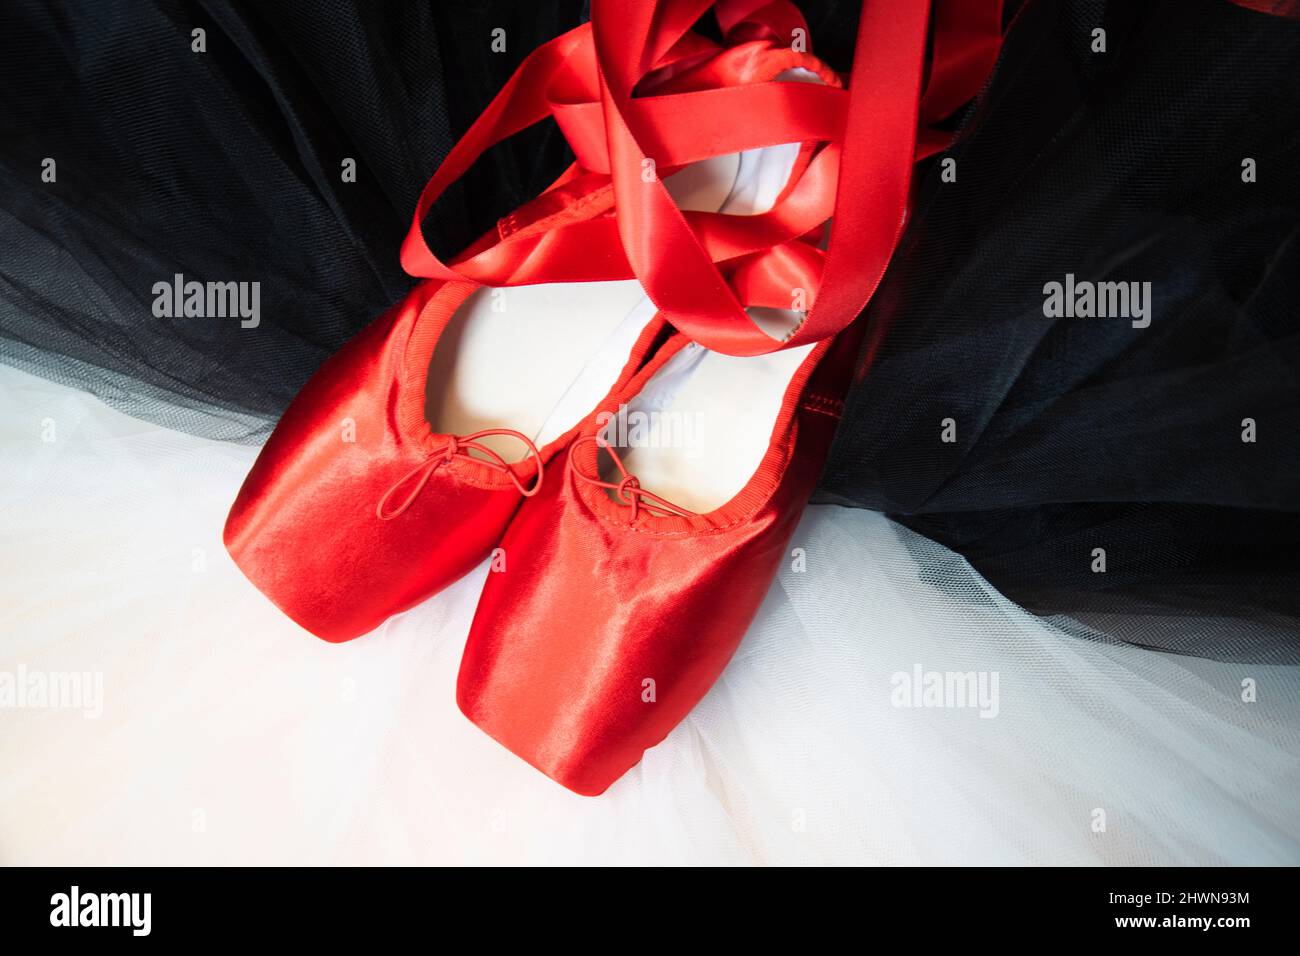 Red ballet pointe shoes resting on a white and black tutu. Stock Photo